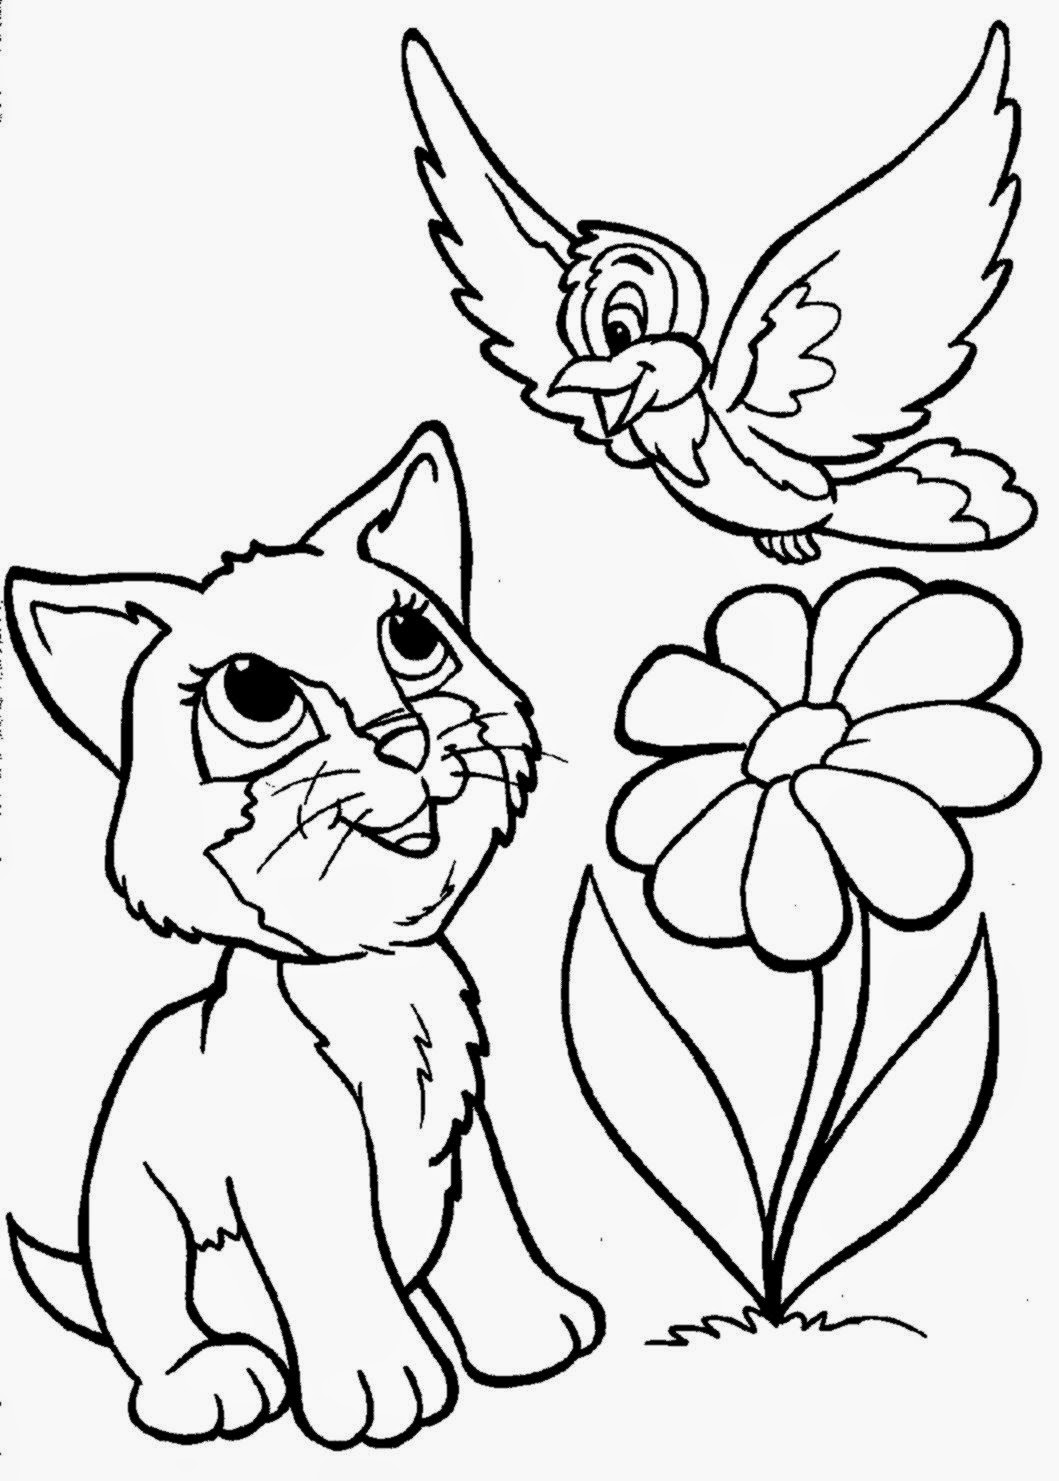 February 2015 Free Coloring Sheet Coloring Wallpapers Download Free Images Wallpaper [coloring654.blogspot.com]